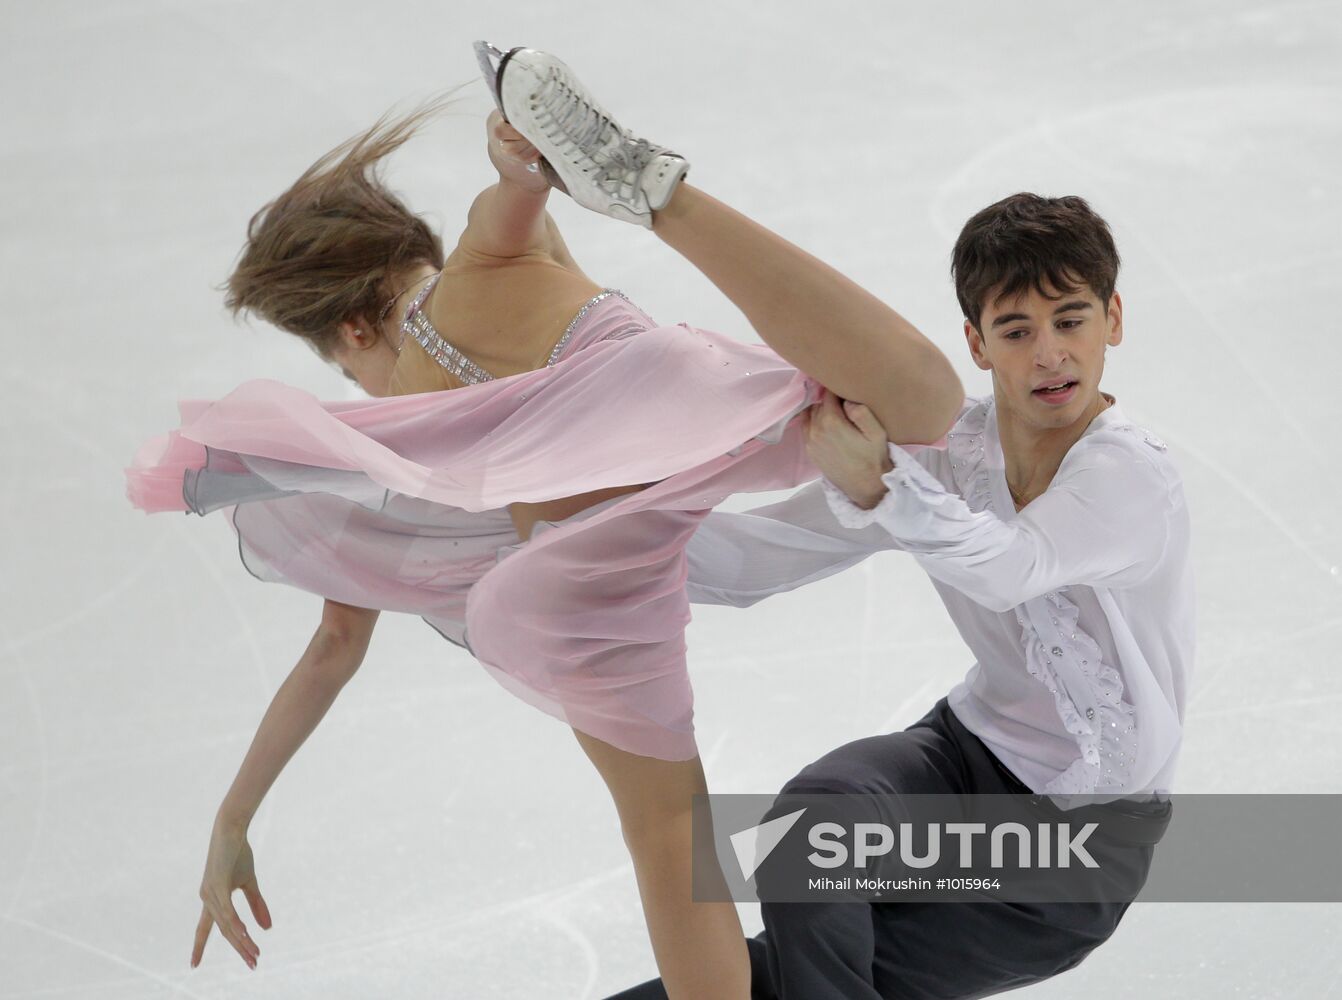 2012 Winter Youth Olympics. Figure Skating